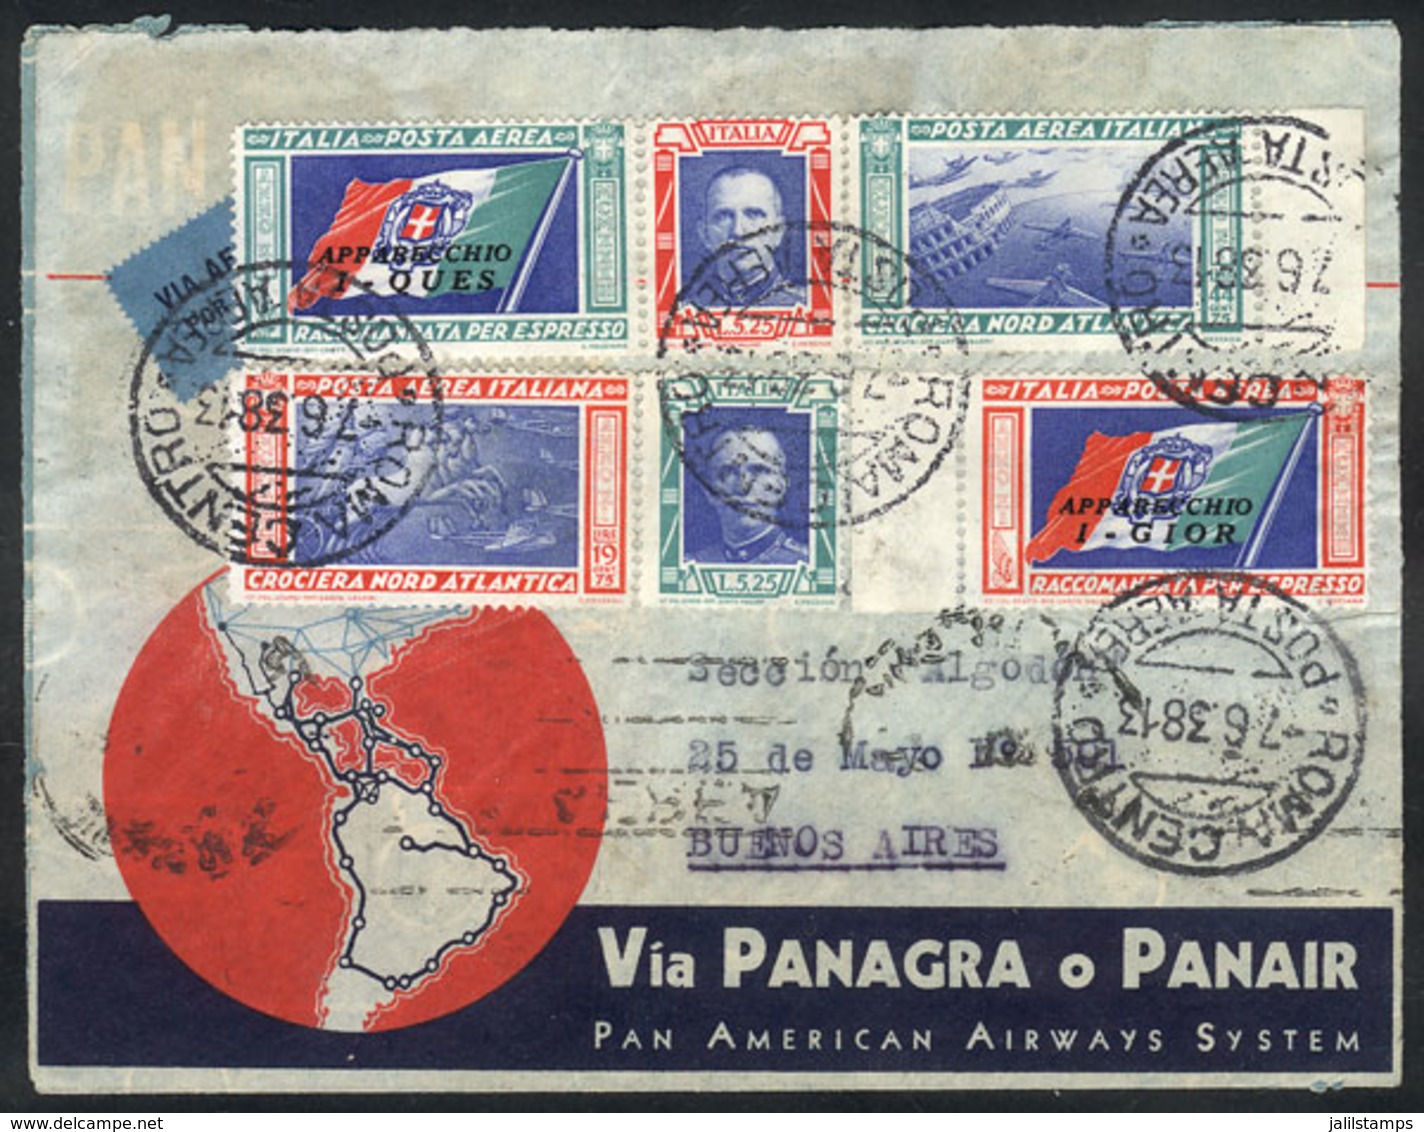 726 ITALY: Airmail Cover Franked By Sc.C48 And C49, Sent From Roma To Buenos Aires On 7/JUN/1938, With Arrival Backstamp - Unclassified